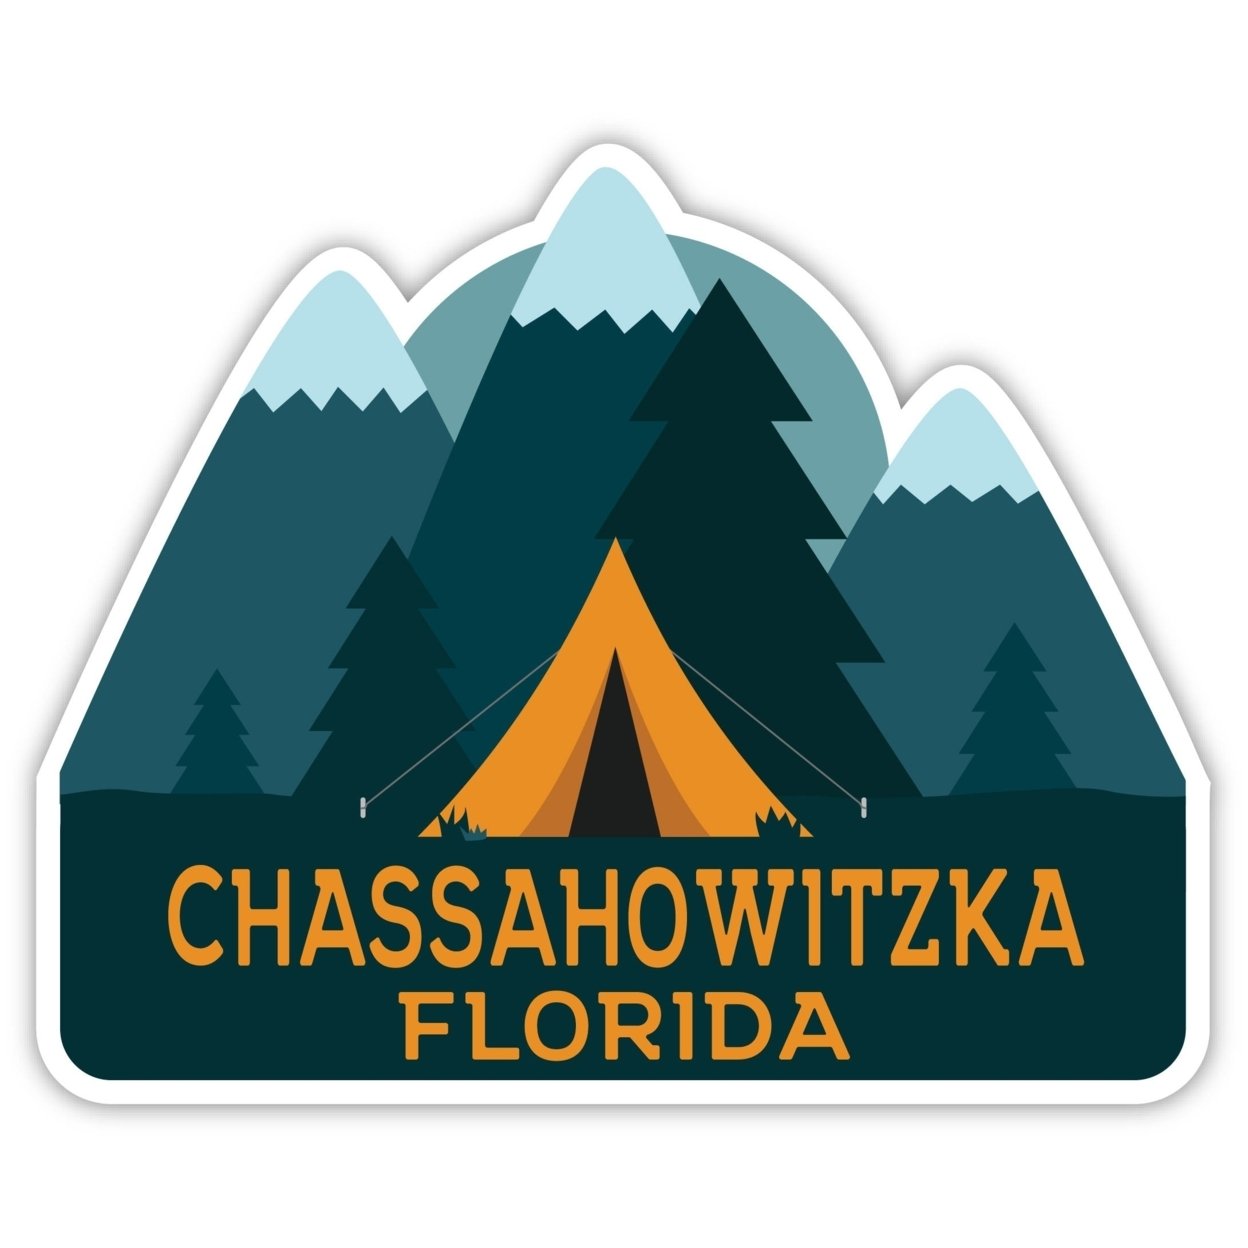 Chassahowitzka Florida Souvenir Decorative Stickers (Choose Theme And Size) - 4-Pack, 12-Inch, Tent